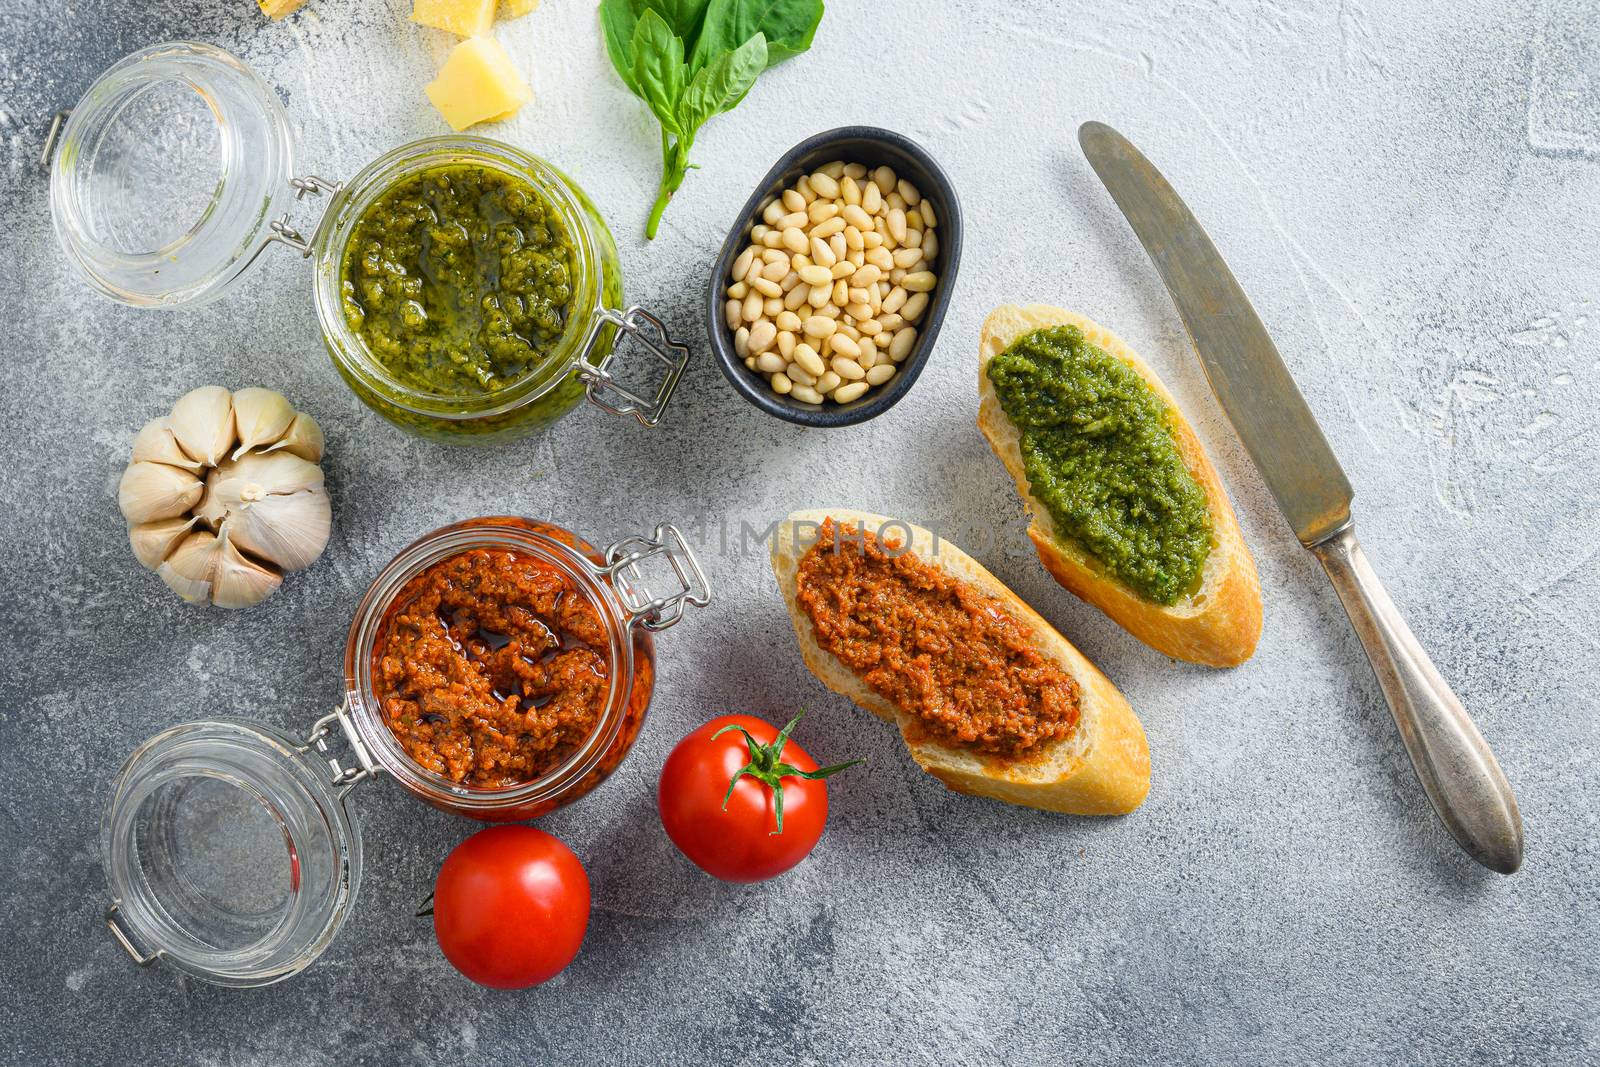 Glass jars with red and green pesto and cooking italian recipe ingredients Parmesan cheese, basil leaves, pine nuts, olive oil, garlic, salt, tomatoes breakfast panini with sauce top view on grey concrete surface space for text by Ilianesolenyi